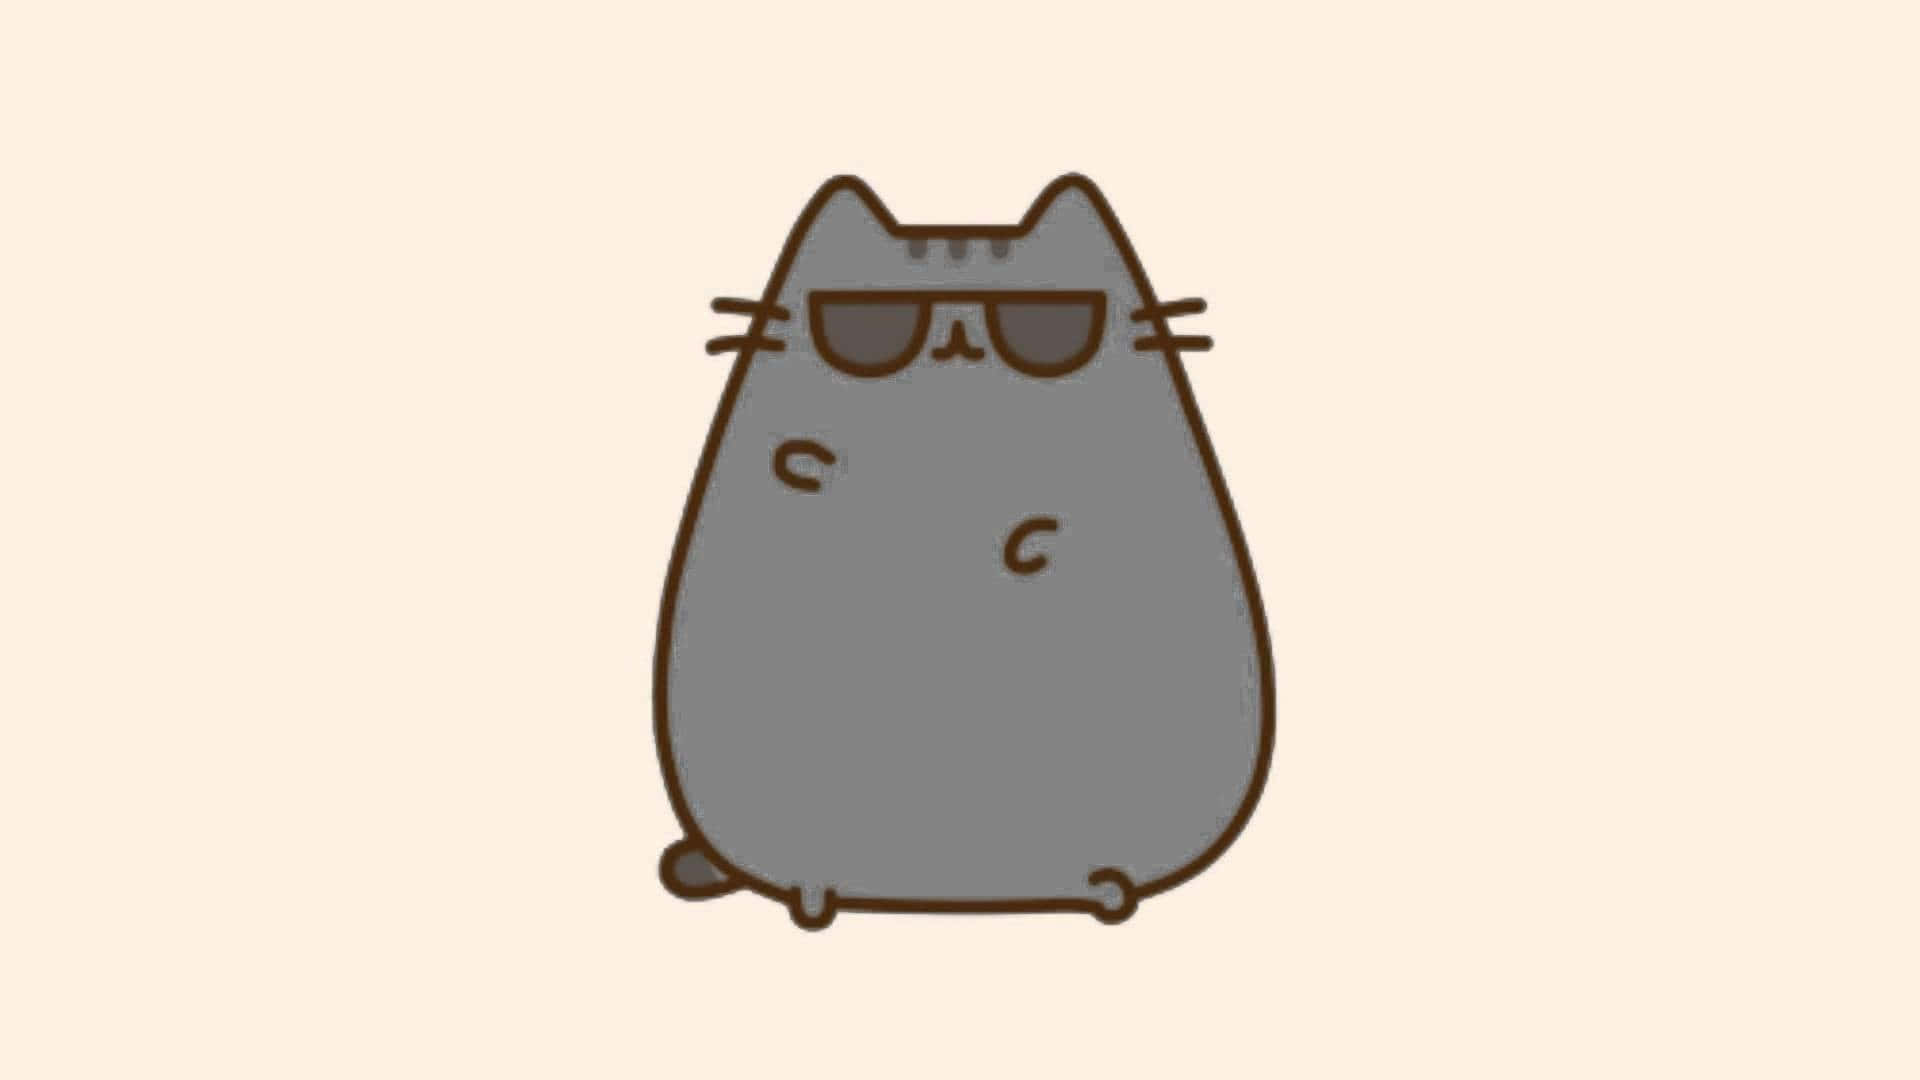 A day in the life of Pusheen.